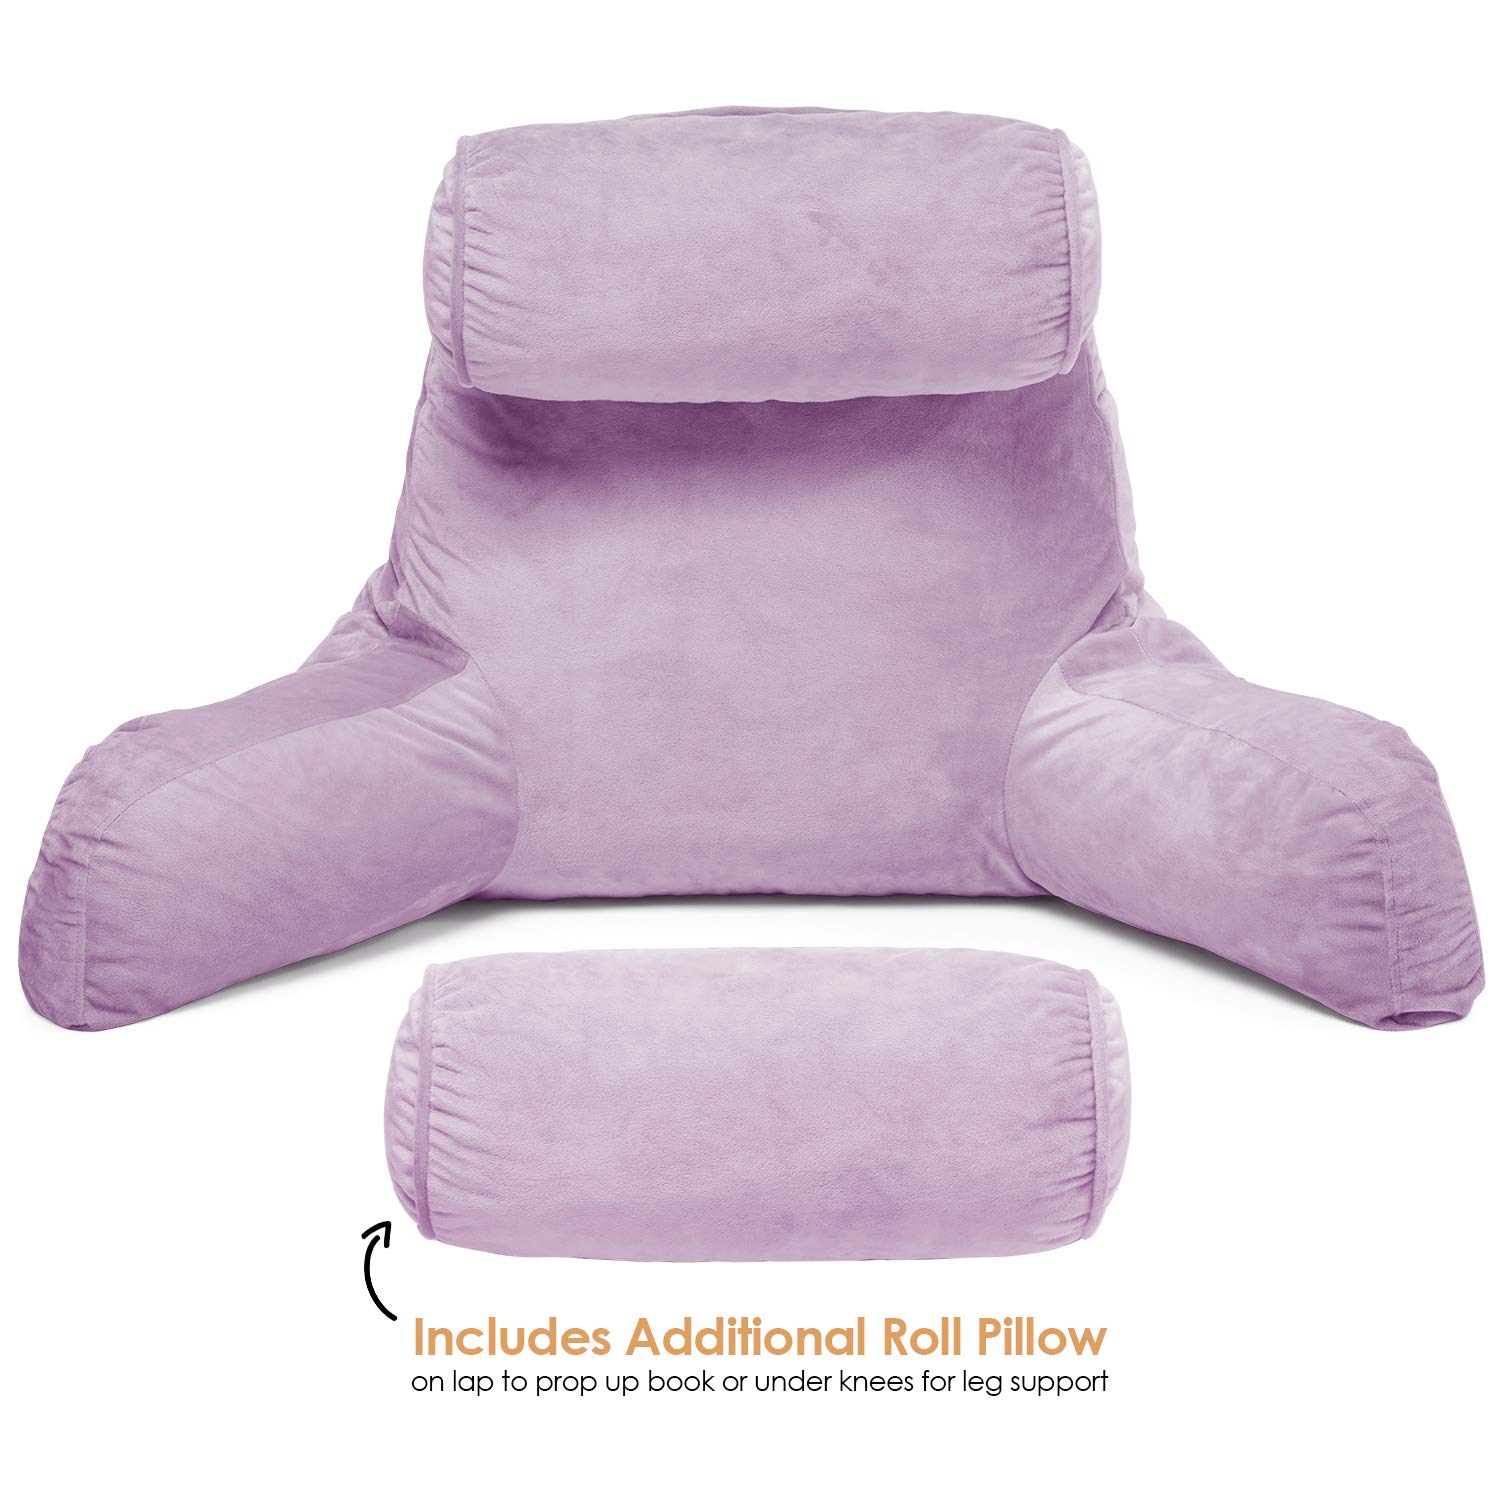 Clara Clark Bed Rest Reading Pillow with Arms and Pockets - Premium Shredded Memory Foam TV Pillow, Detachable Neck Roll & Lumbar Support Pillow, Large, Light Purple - image 6 of 7